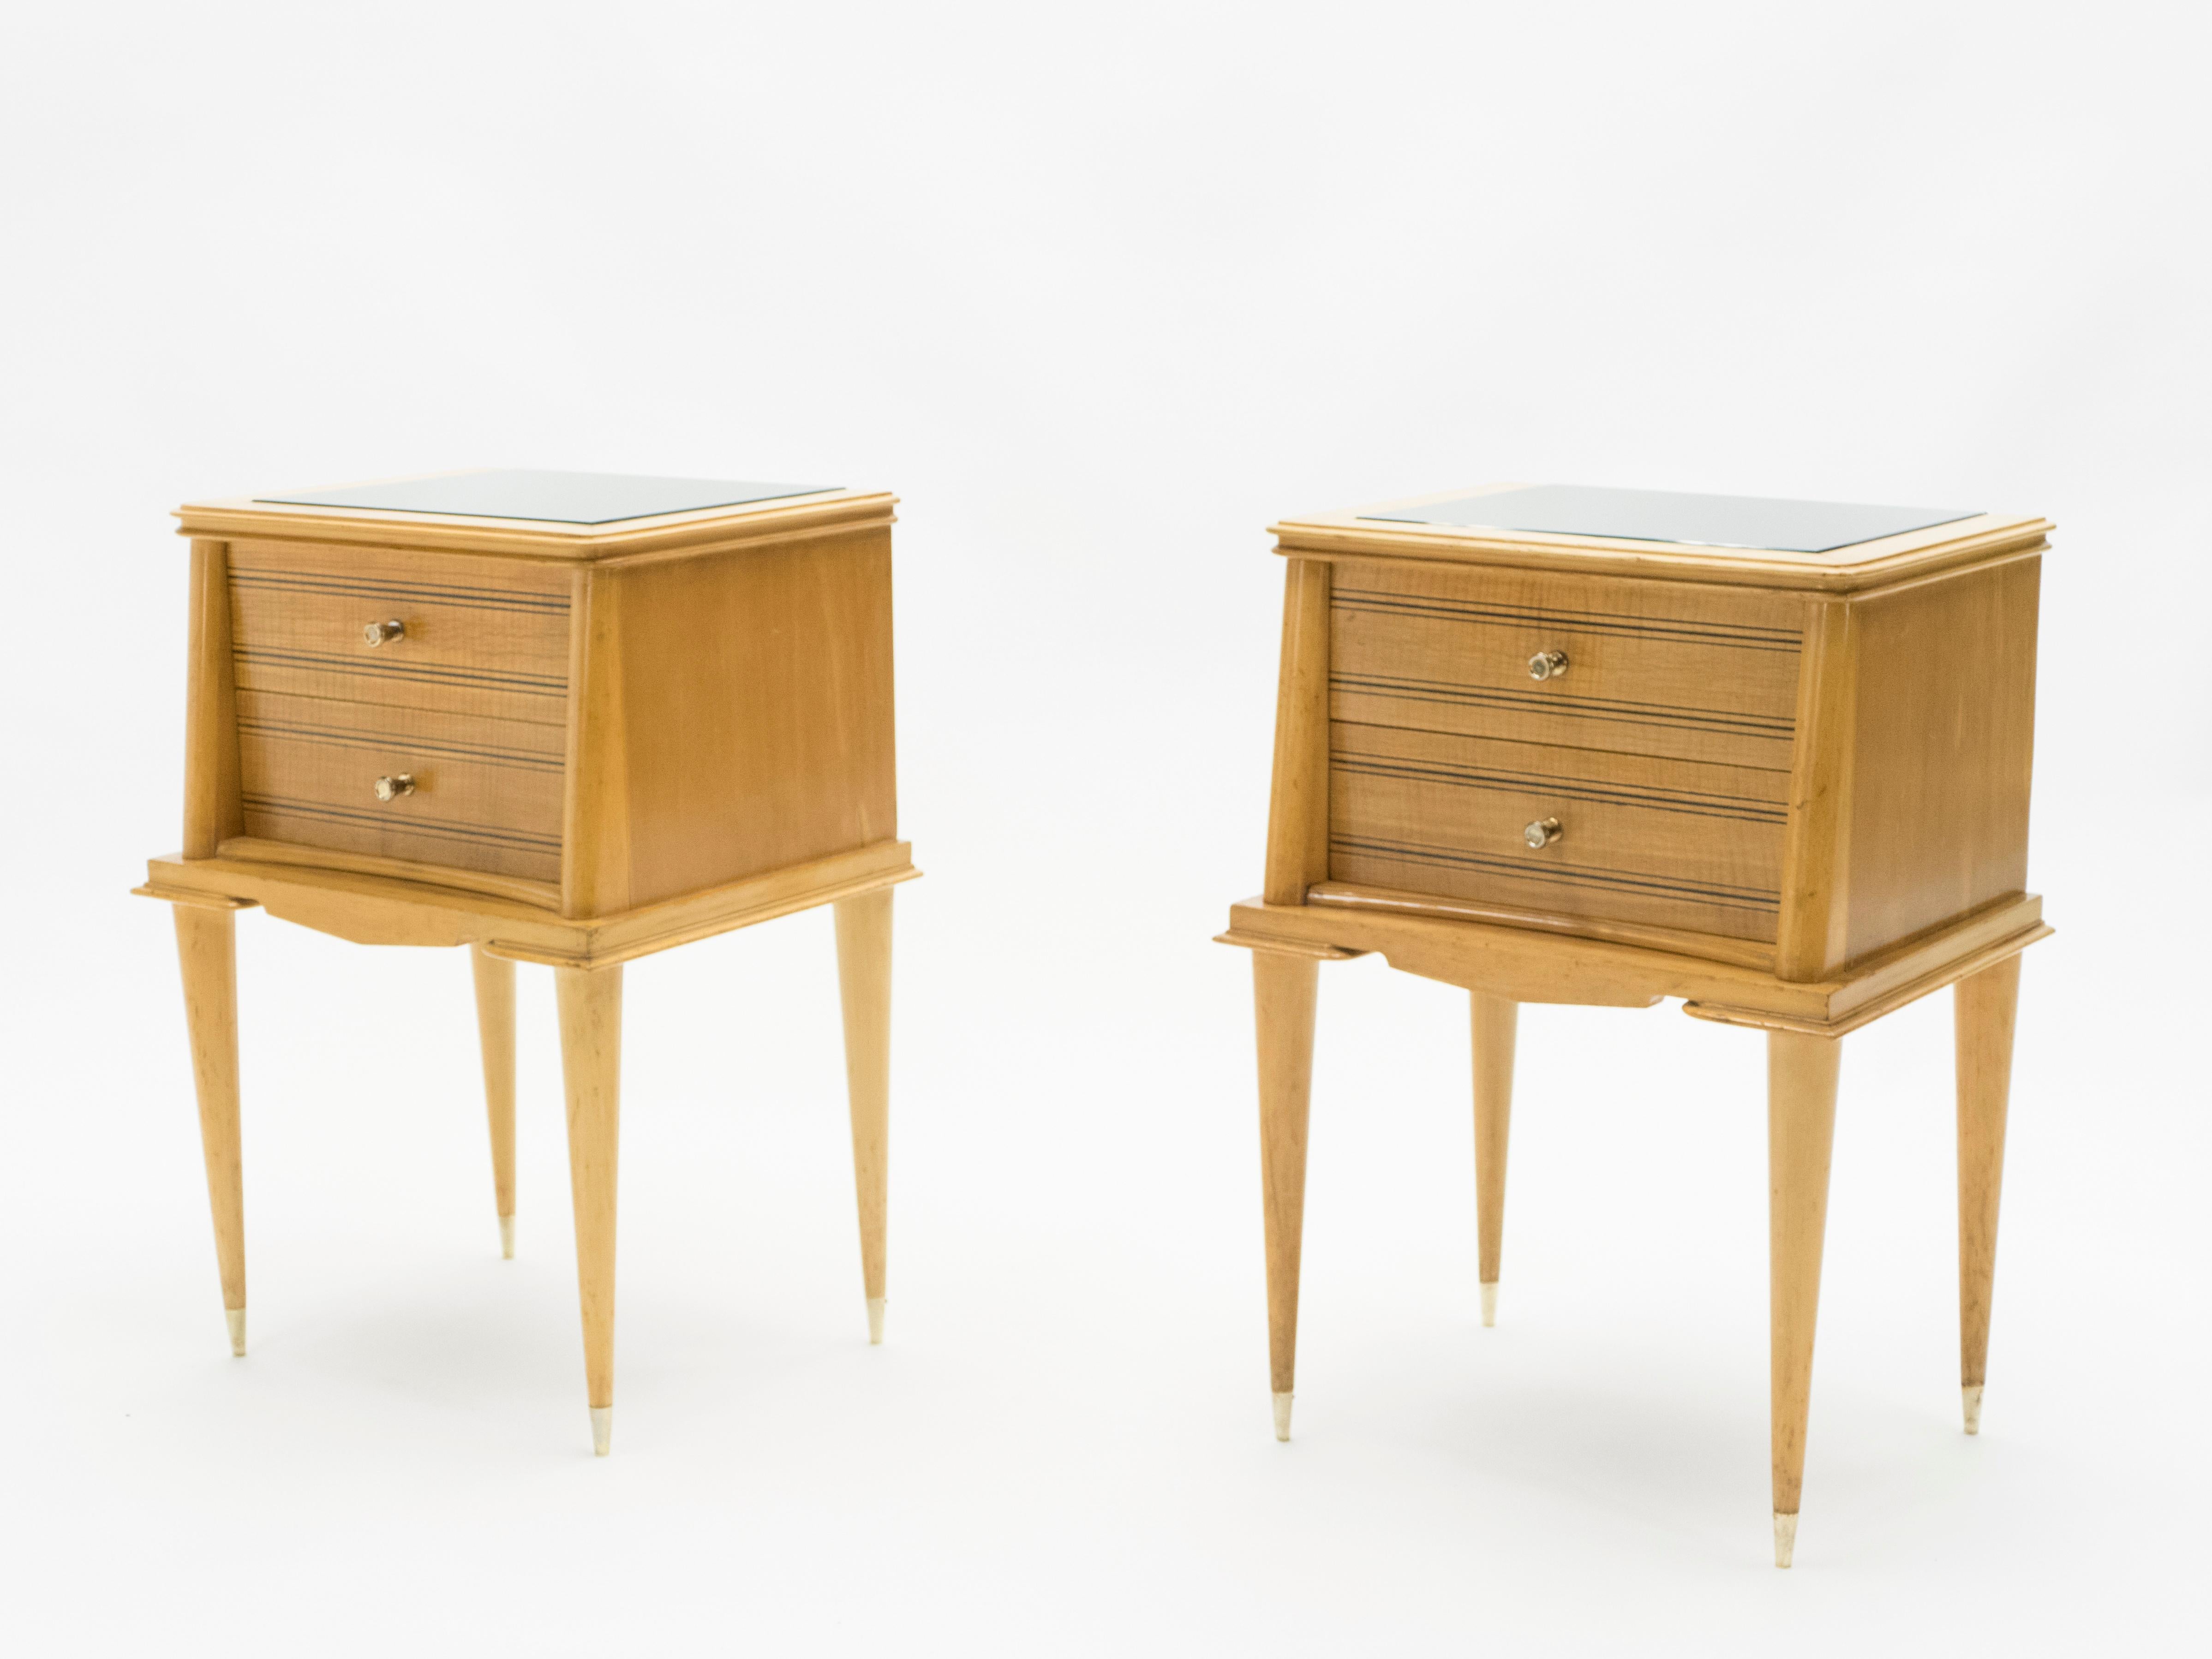 French Sycamore Nightstands 2 Drawers Attributed to Suzanne Guiguichon, 1950s For Sale 9